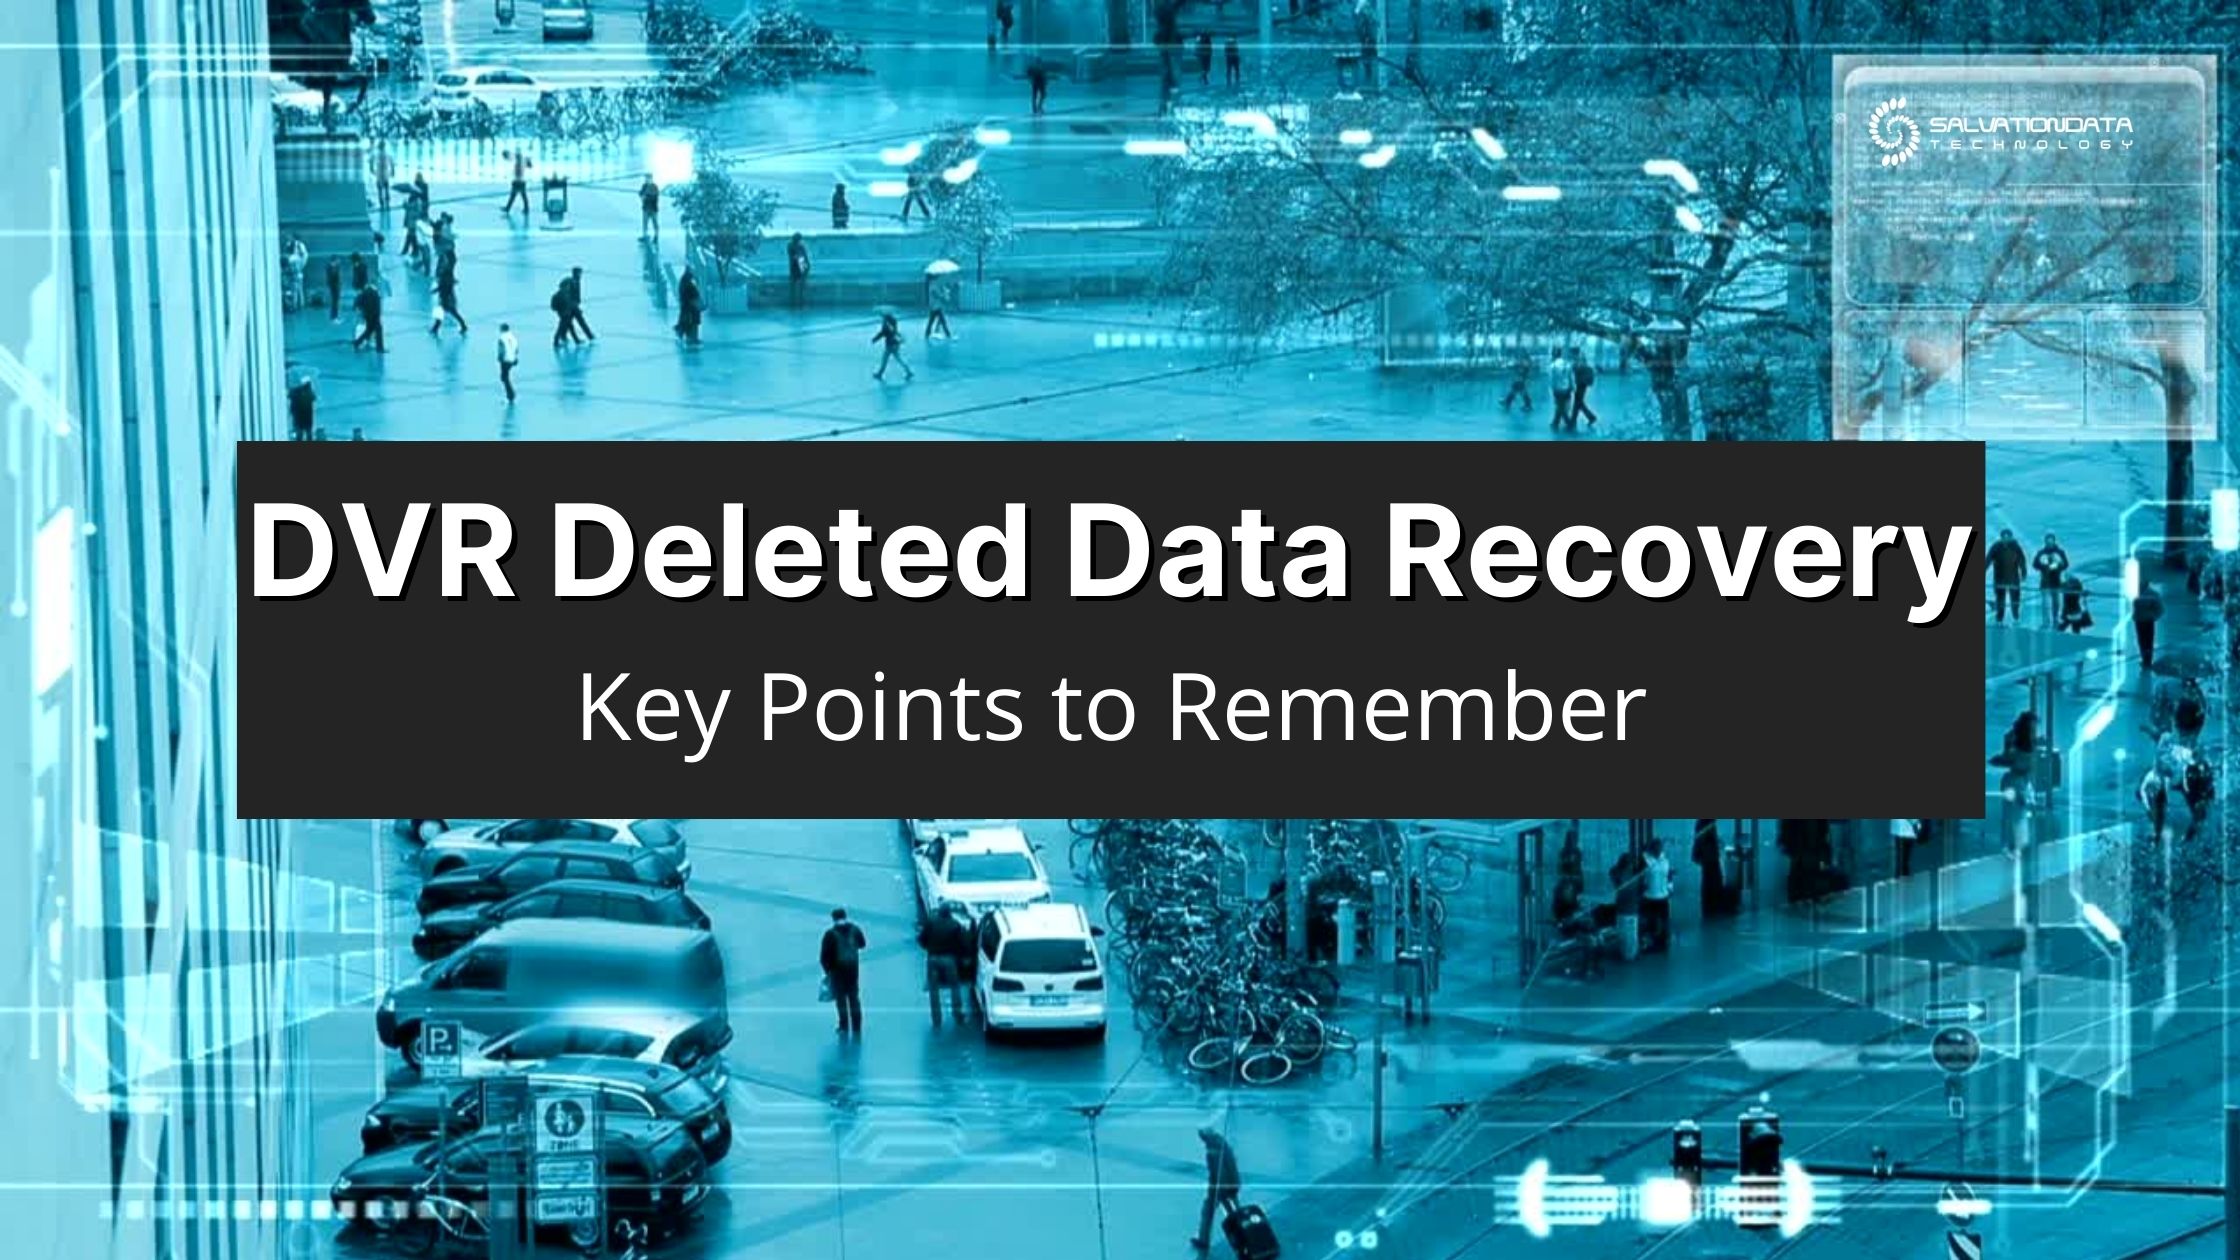 DVR Data Recovery: Key Points to Remember